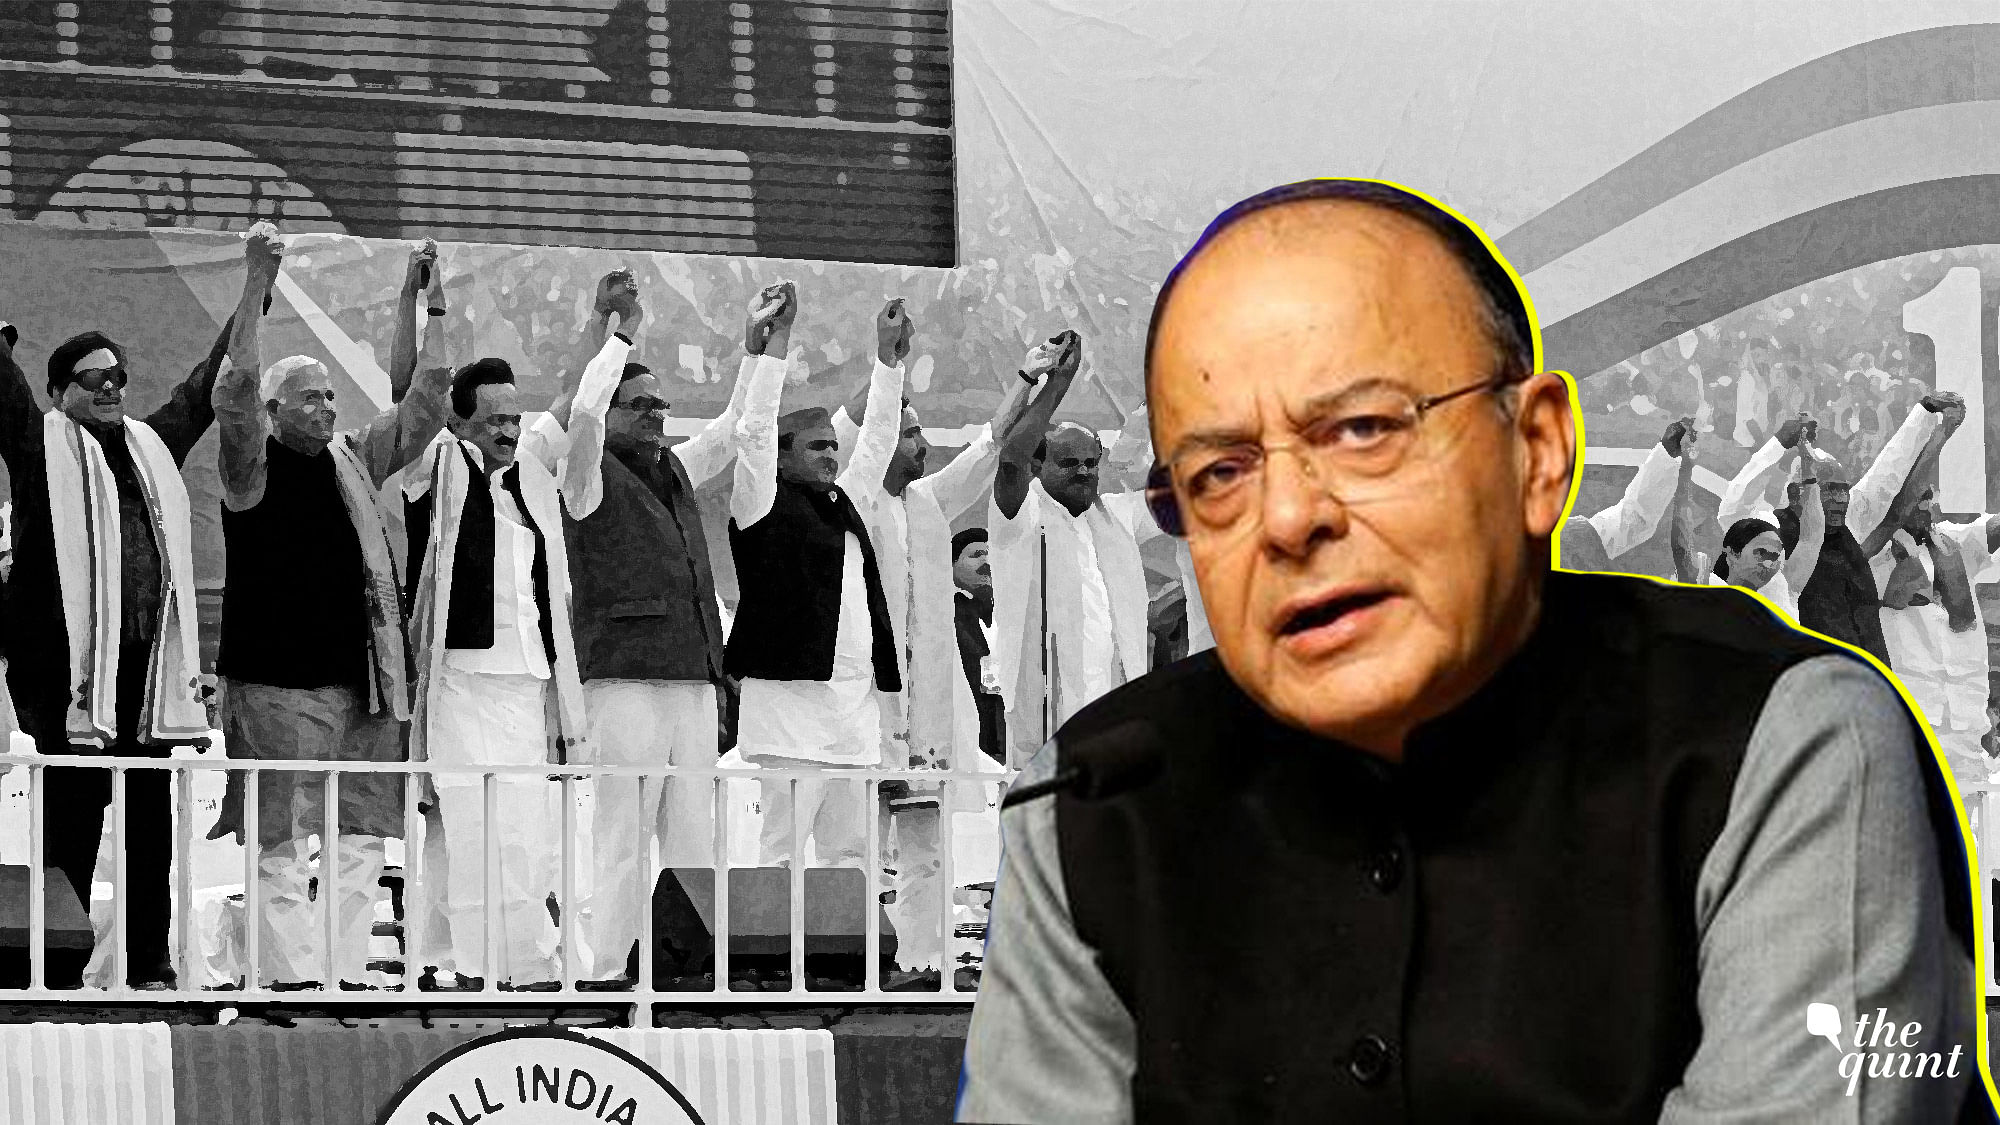 In his latest blog, FM Arun Jaitley says negativity was the flavour in the mega opposition rally in Kolkata.